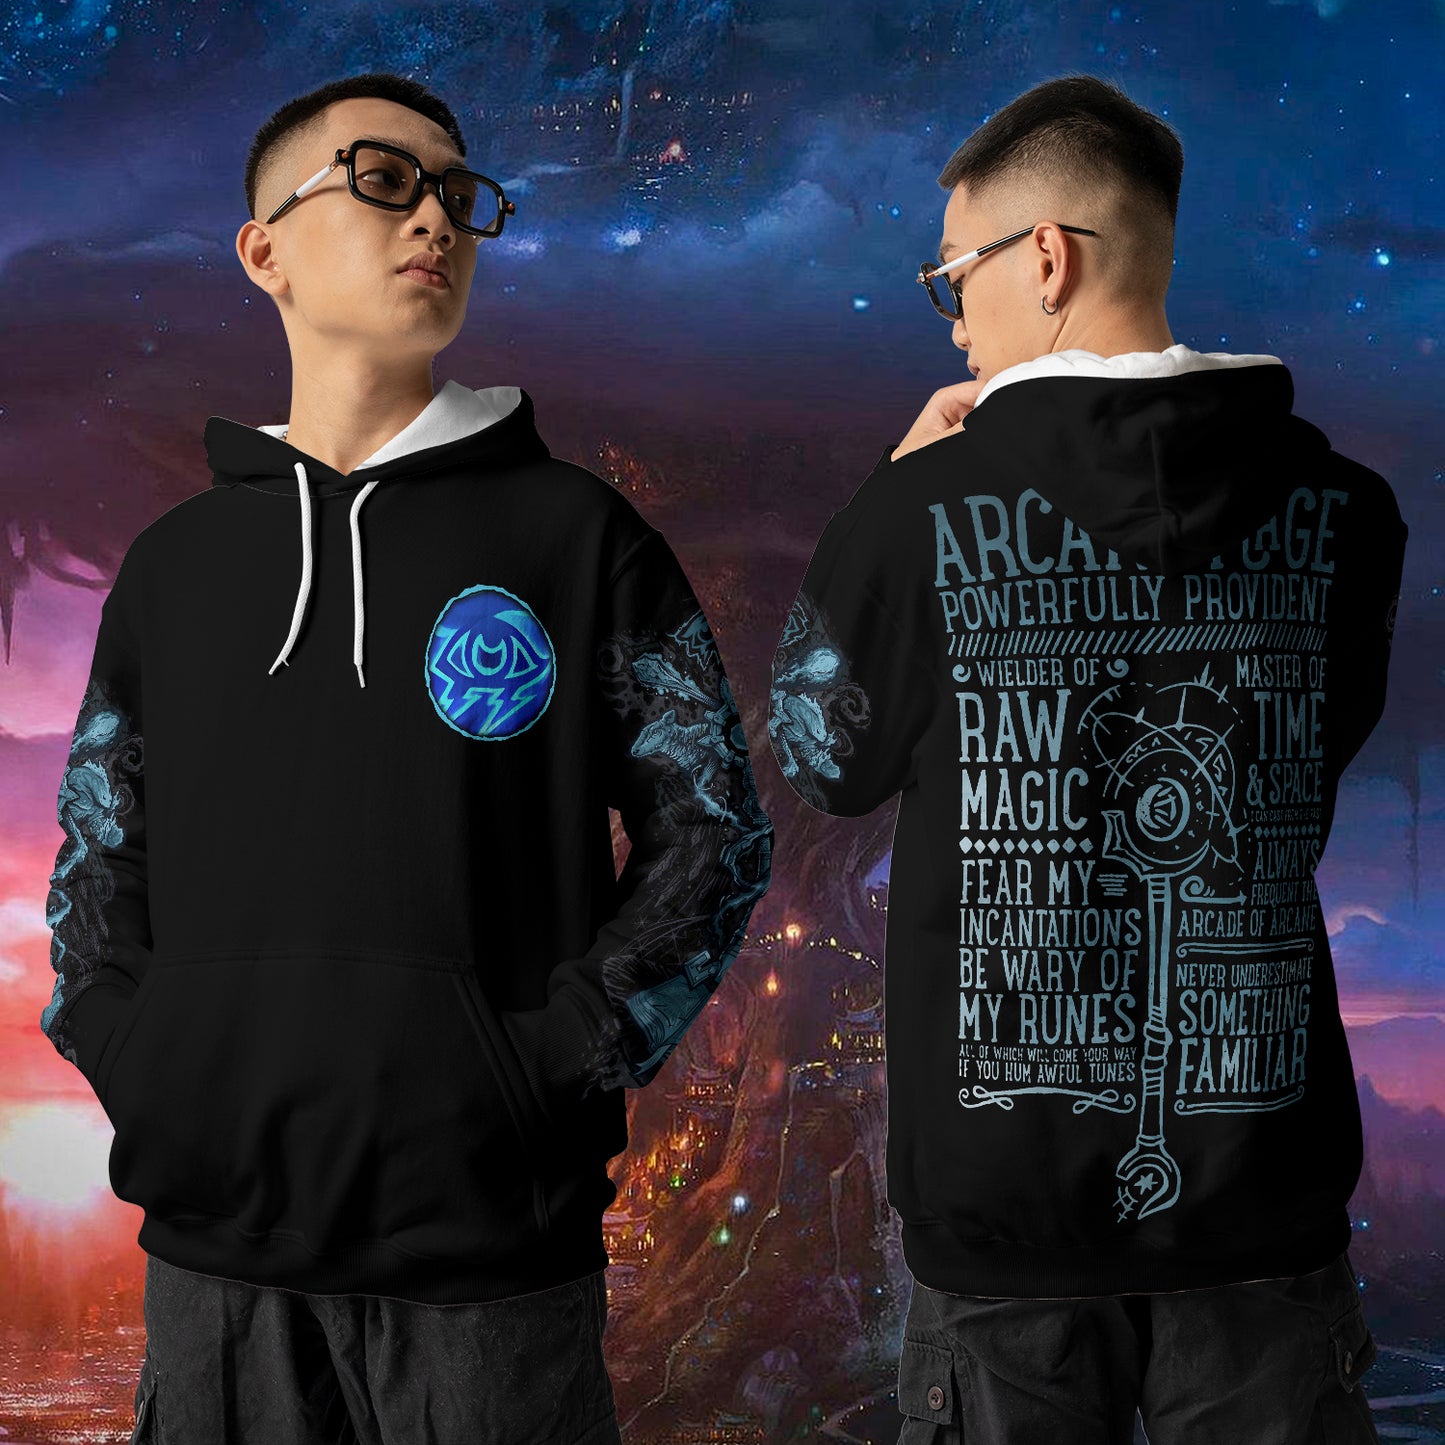 Arcane Mage - WoW Class Guide V3 - All-over Print Hoodie